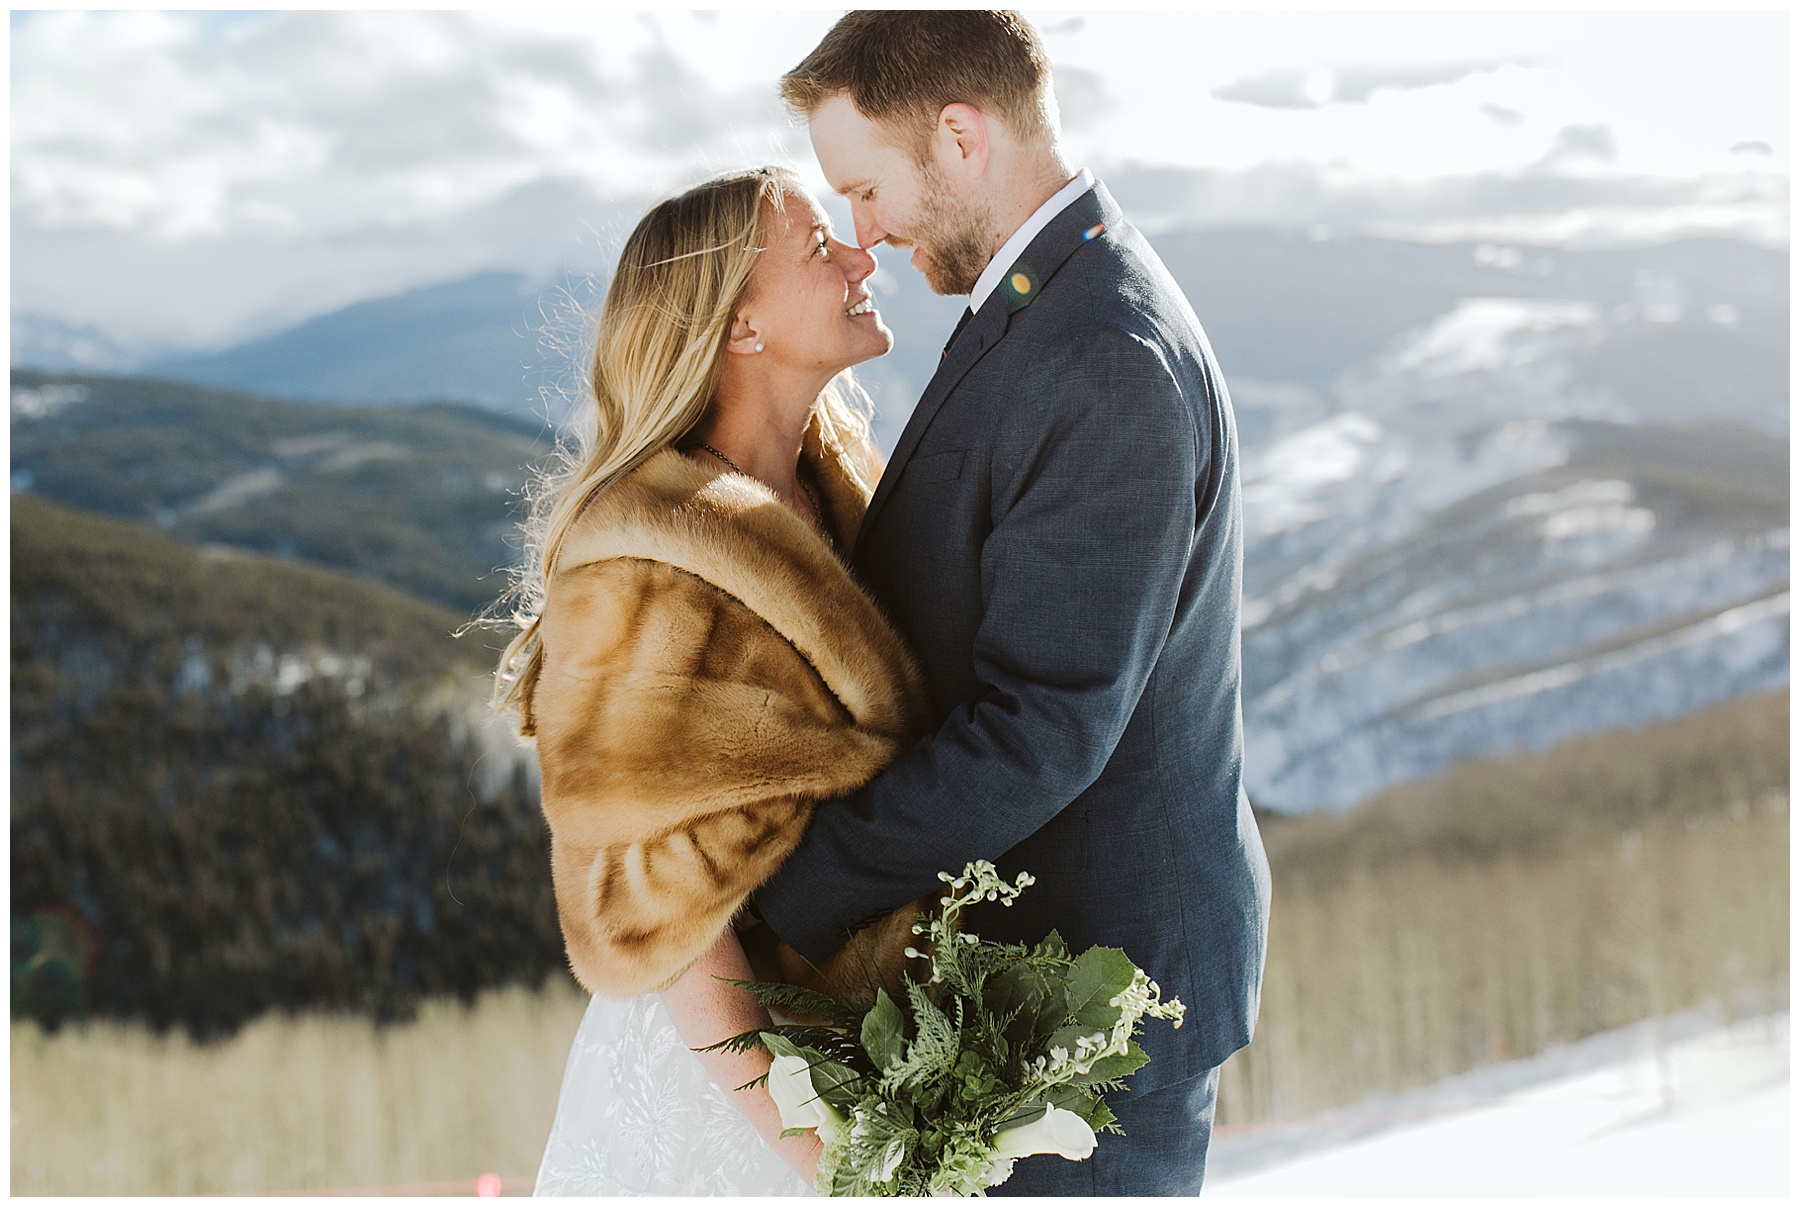 couple stands embracing in the winter snow at their elopement. authentic moments like these are just one reason to elope!